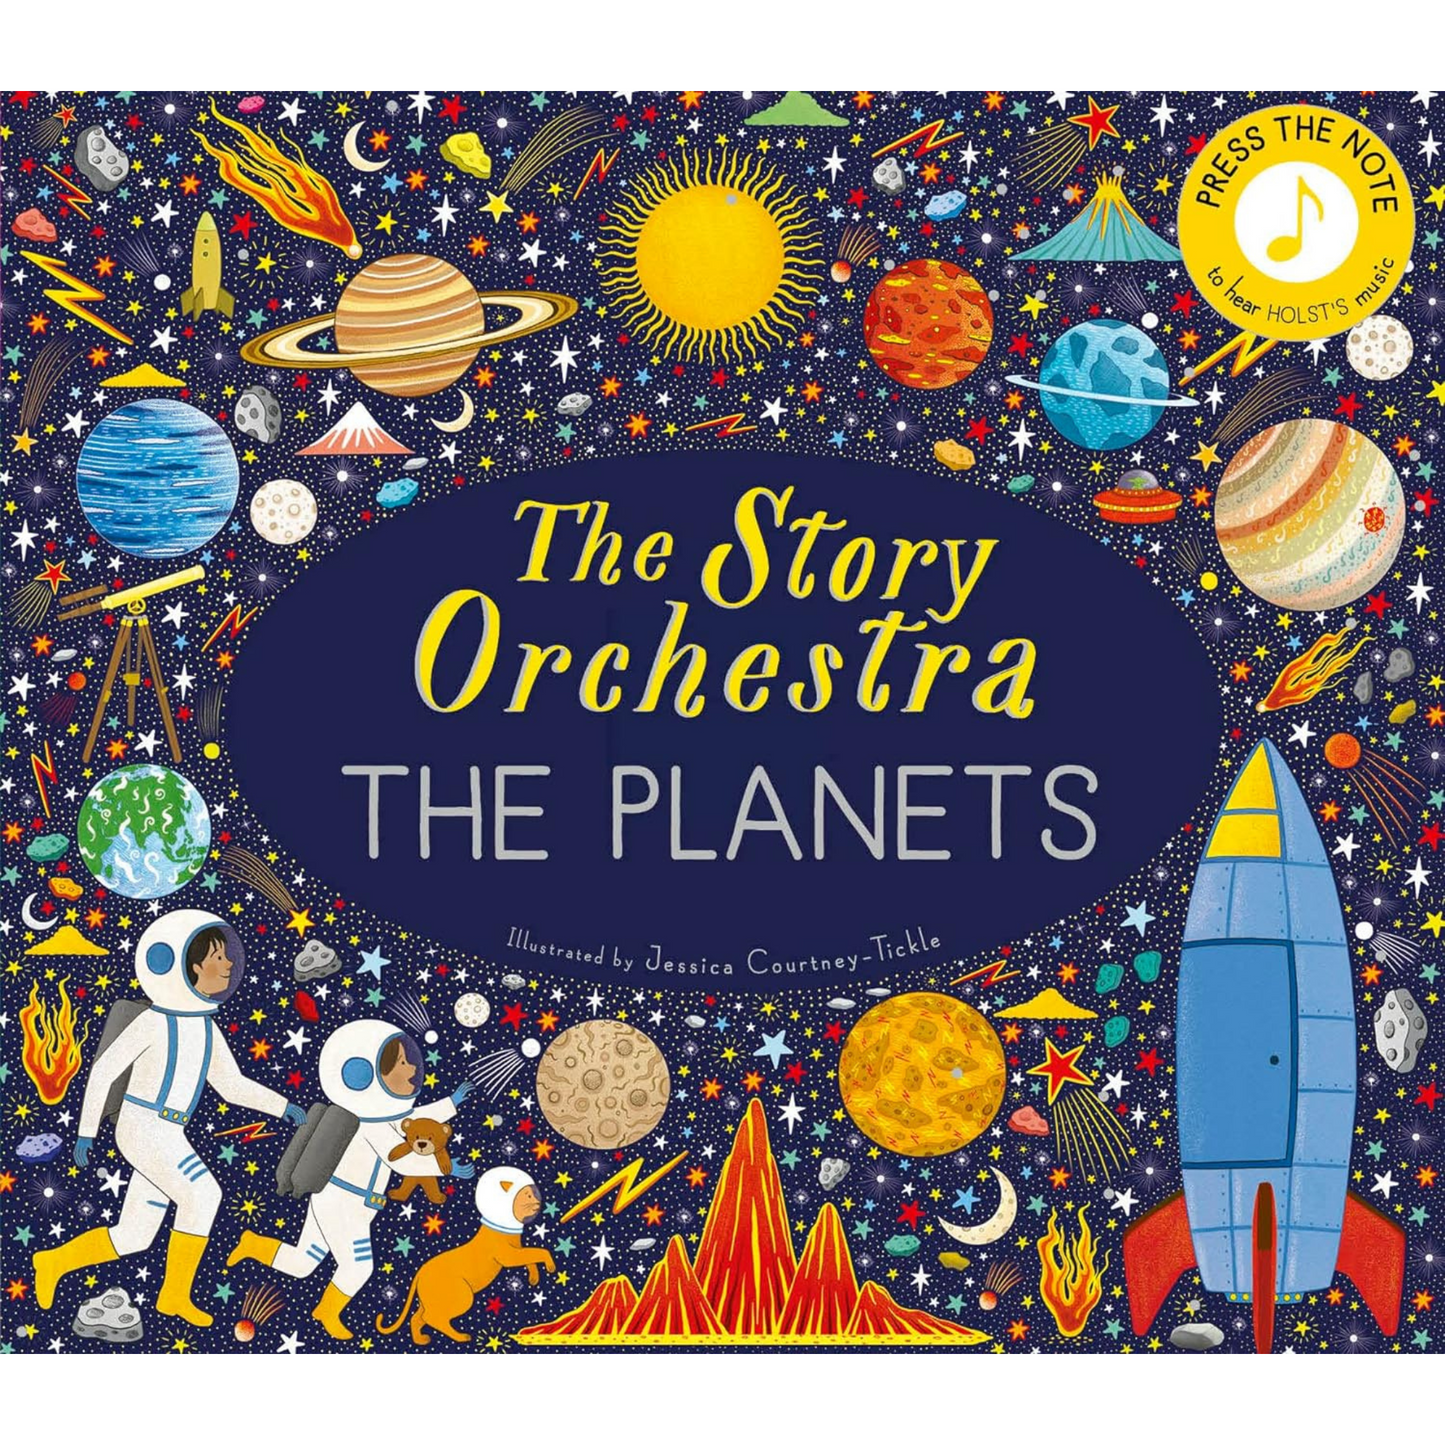 The Story Orchestra: The Planets